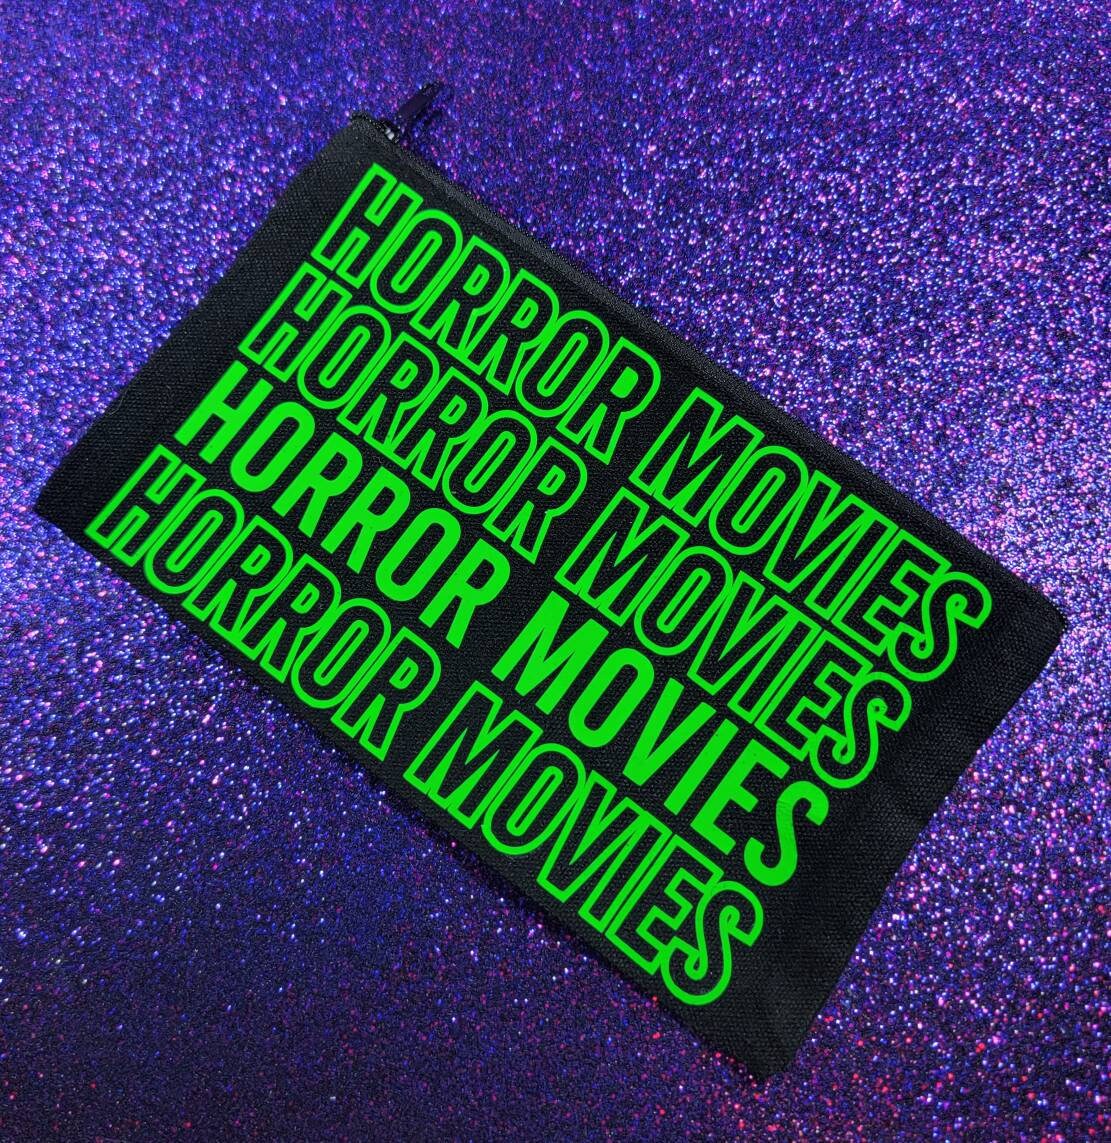 Horror Movies Zippered Pouch, Makeup Bag, Pencil Case 4.8"x8.4"